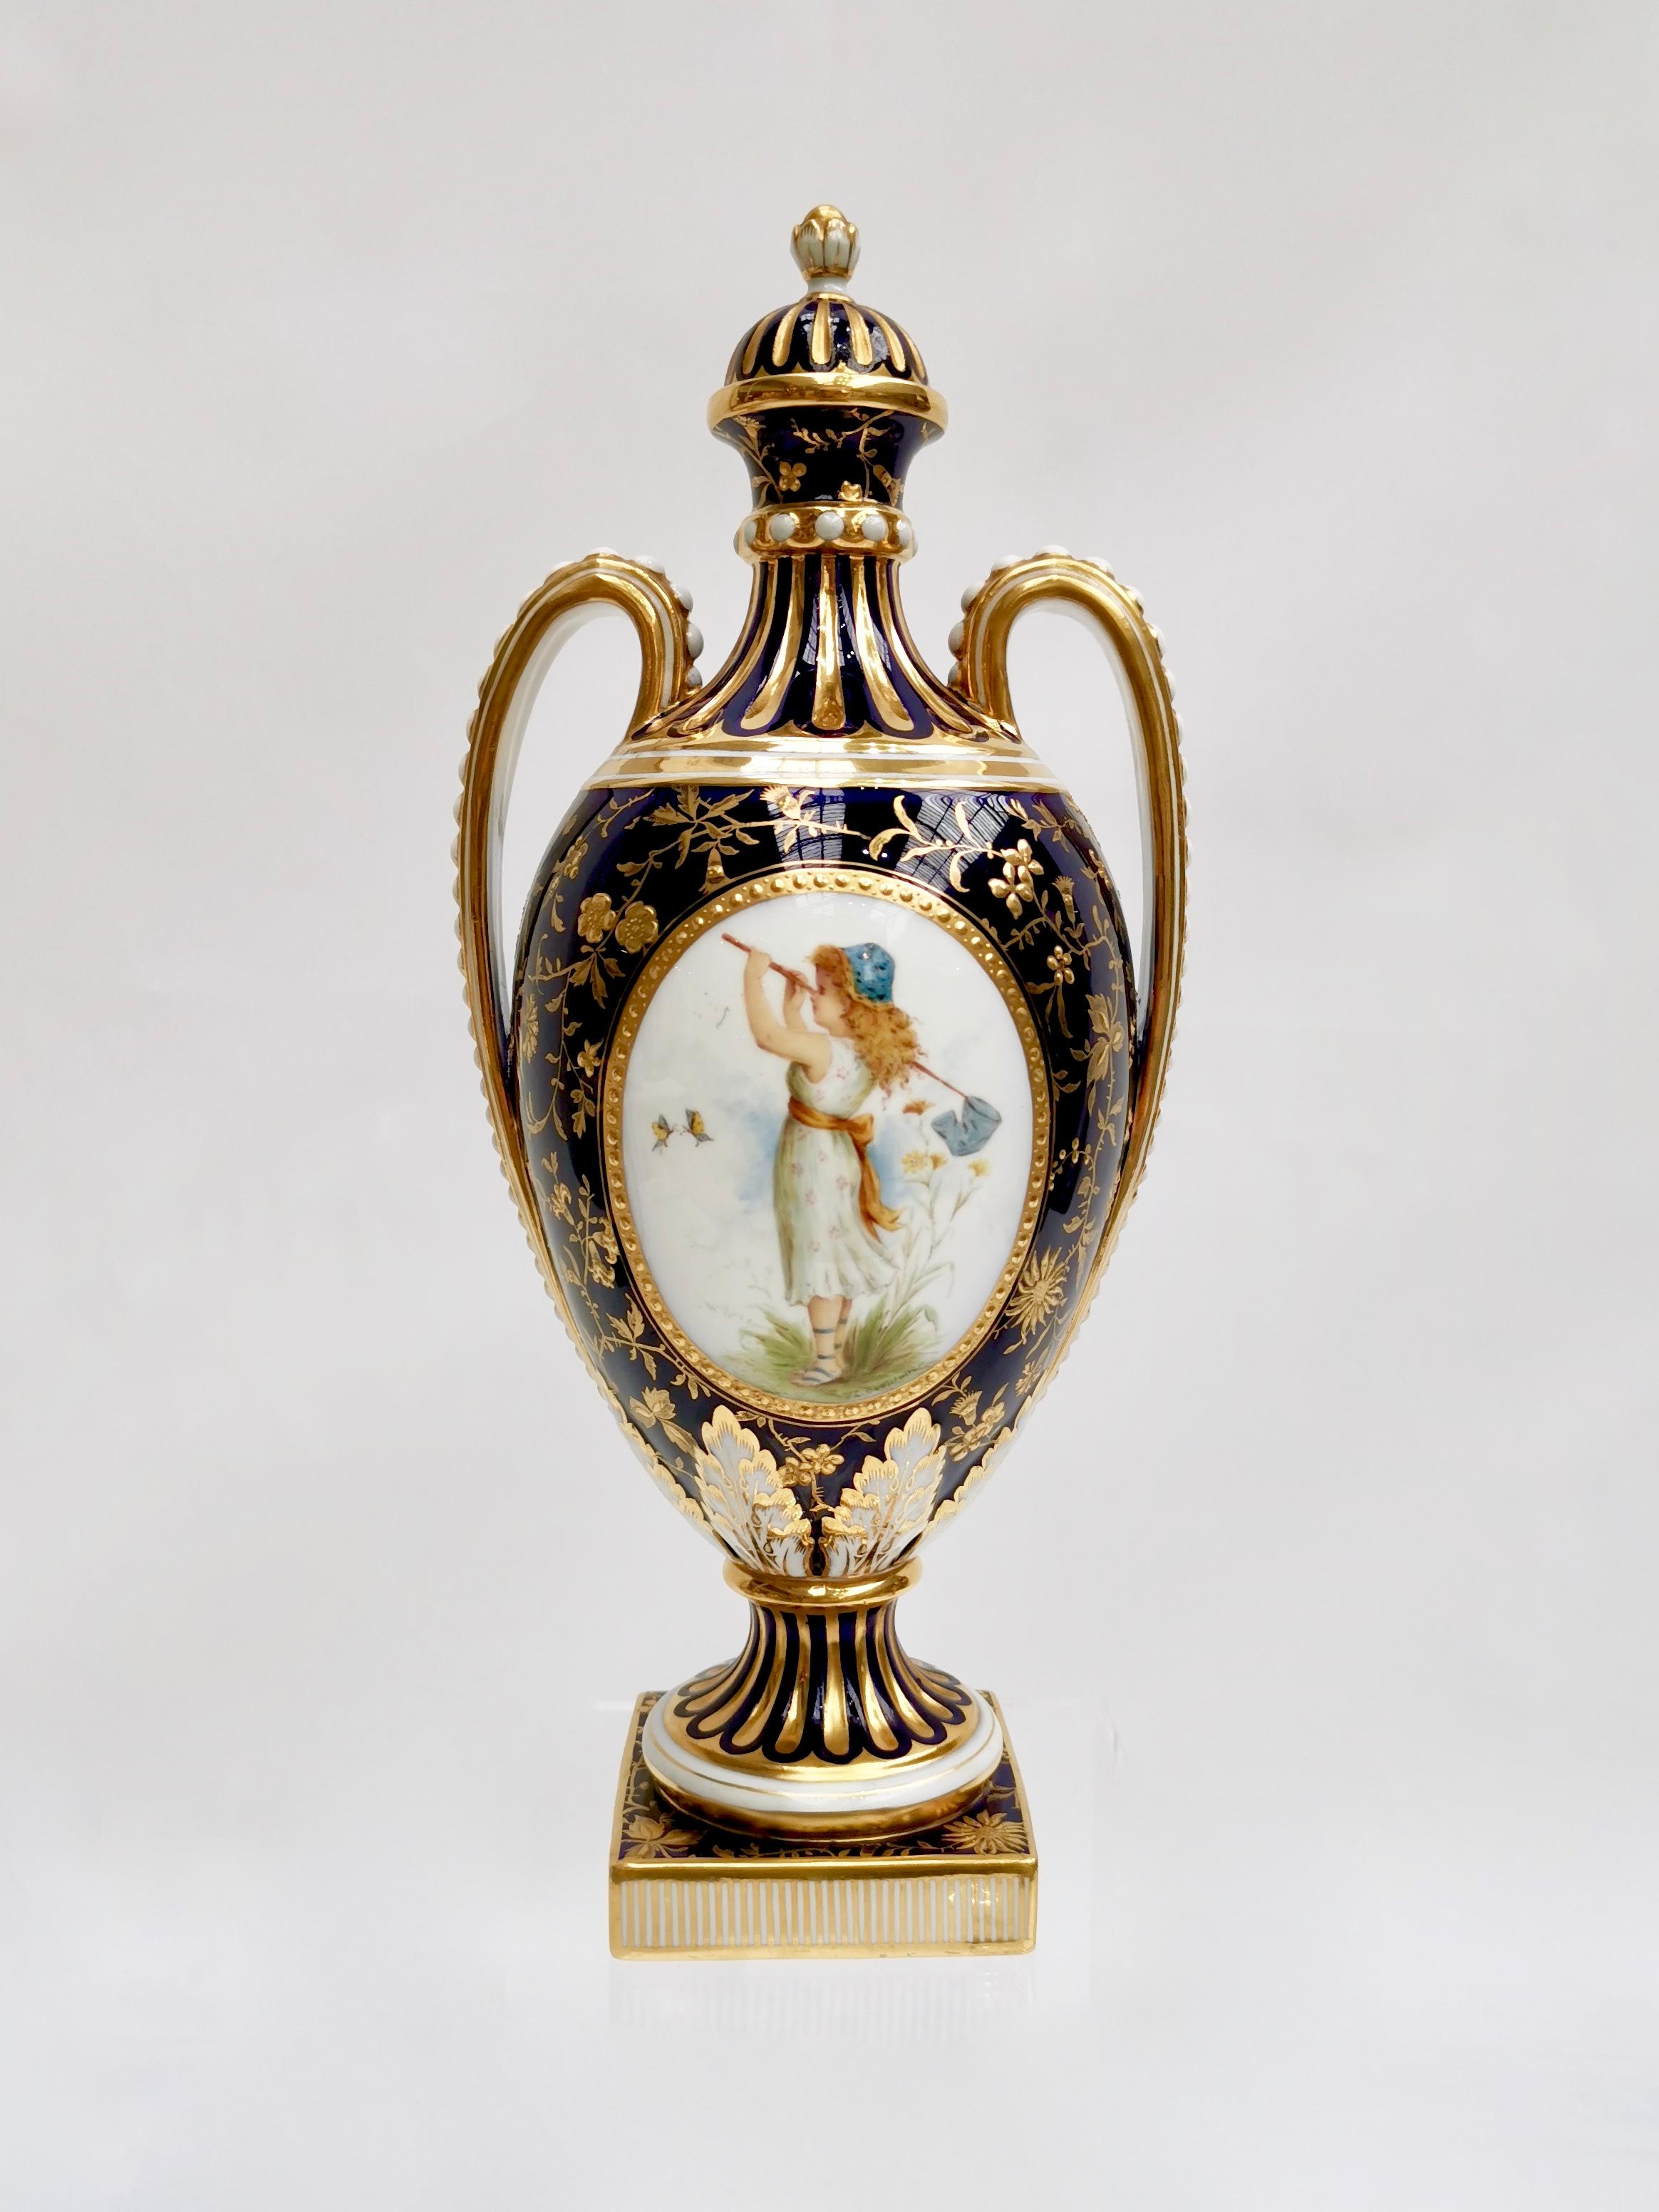 Gilt Minton Garniture Decorated and Signed by Antonin Boullemier, 1891